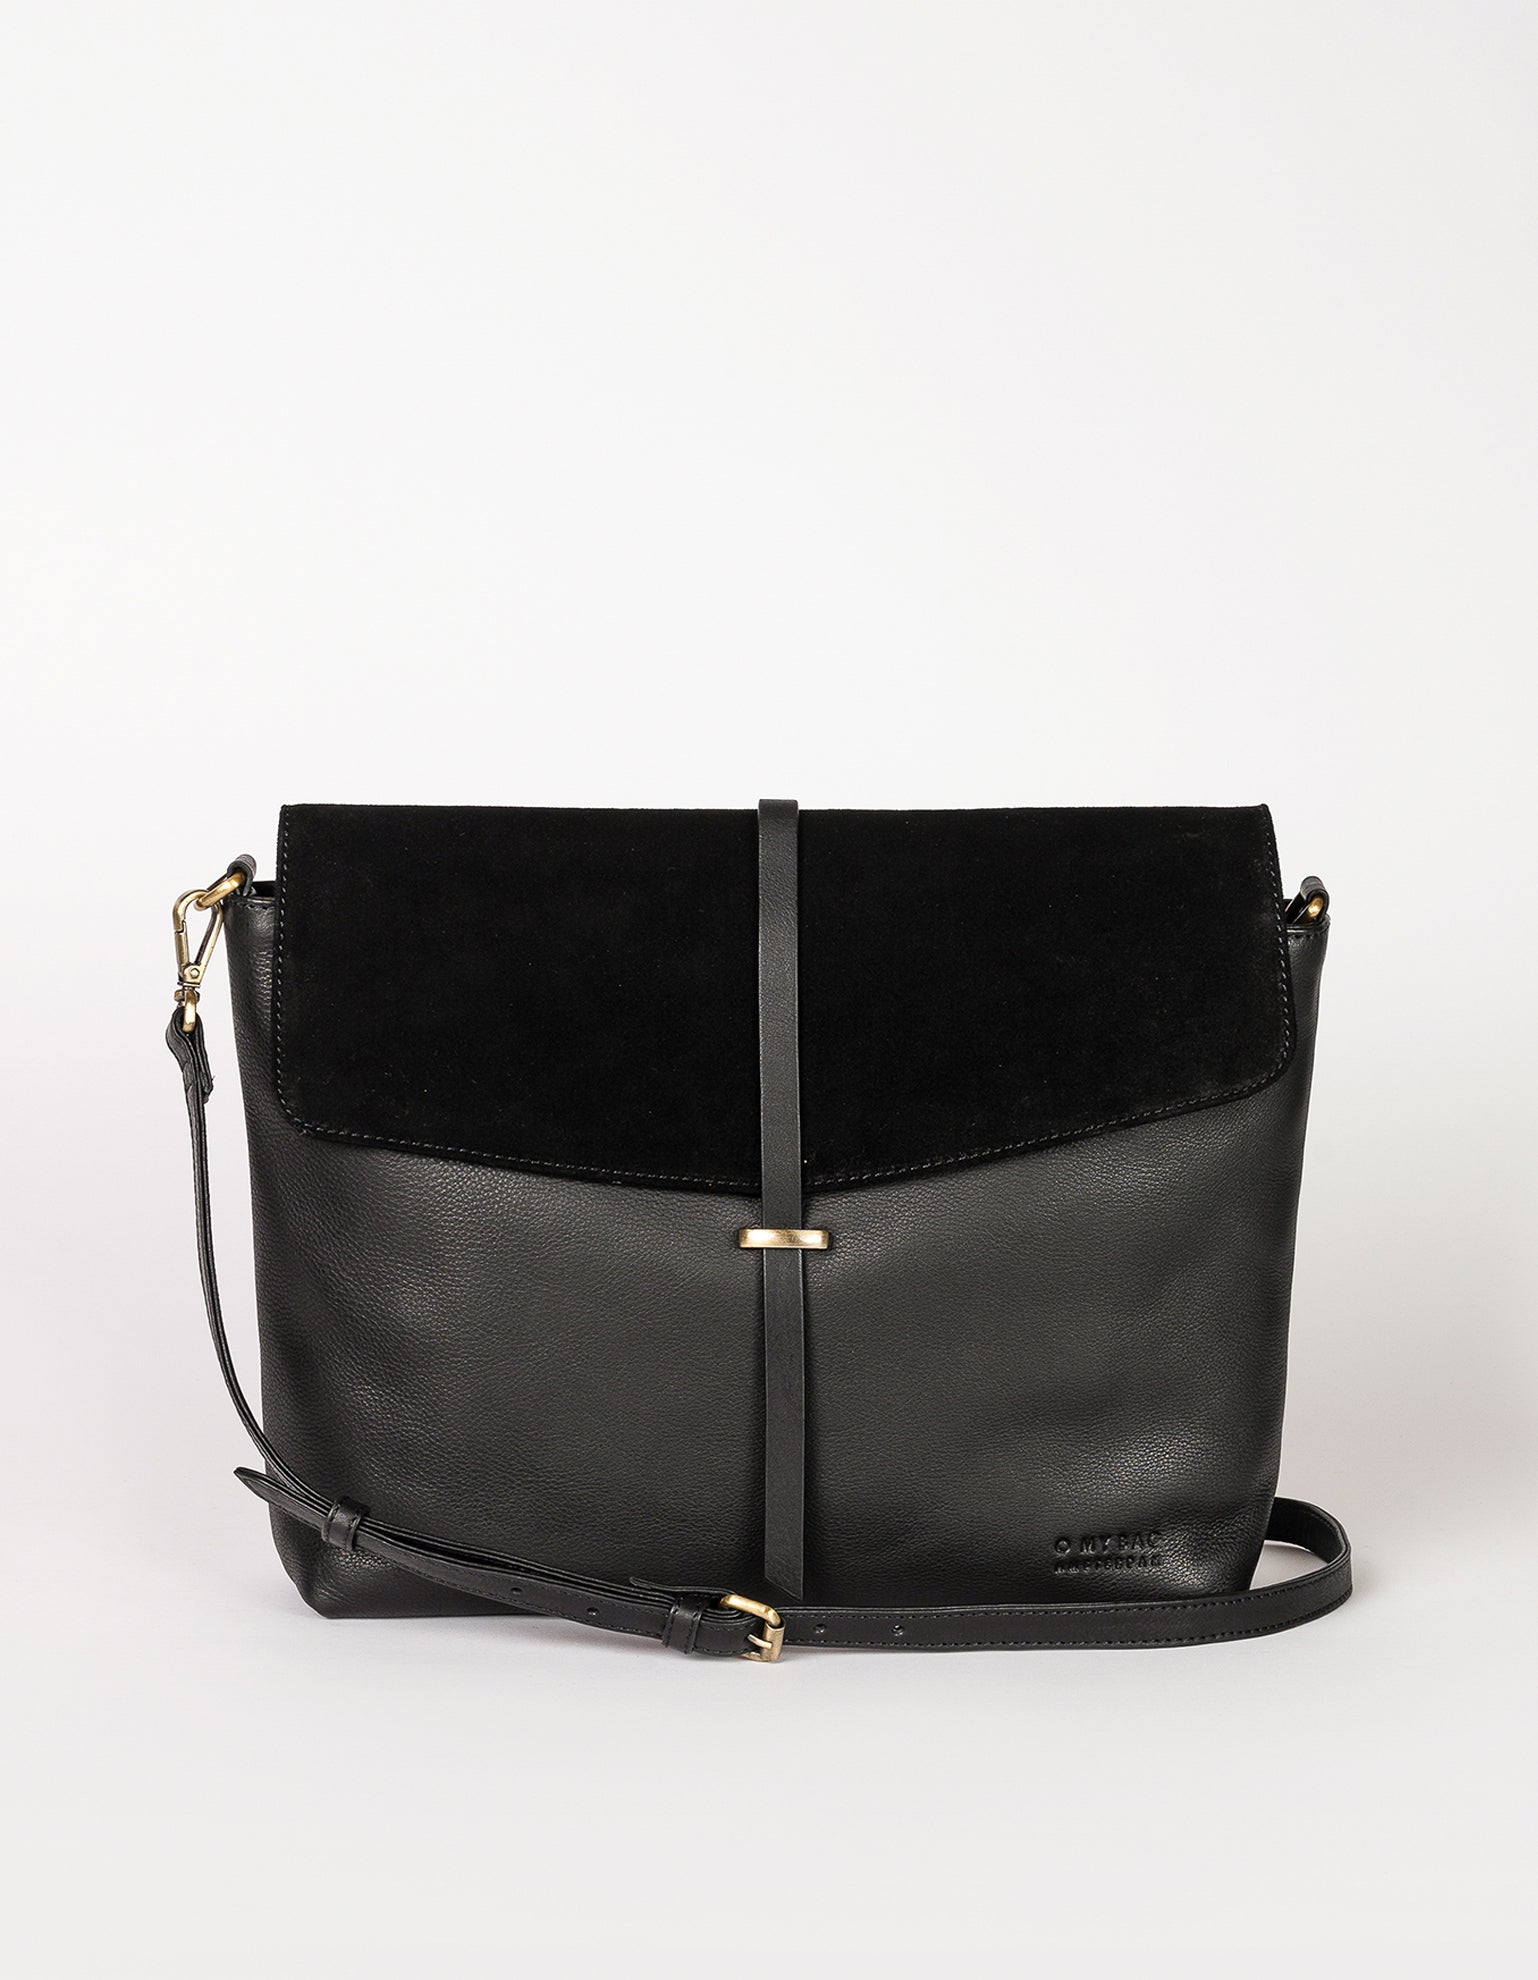 Black Soft Grain & Suede leather womens handbag. Square shape with an adjustable strap. Front product image.